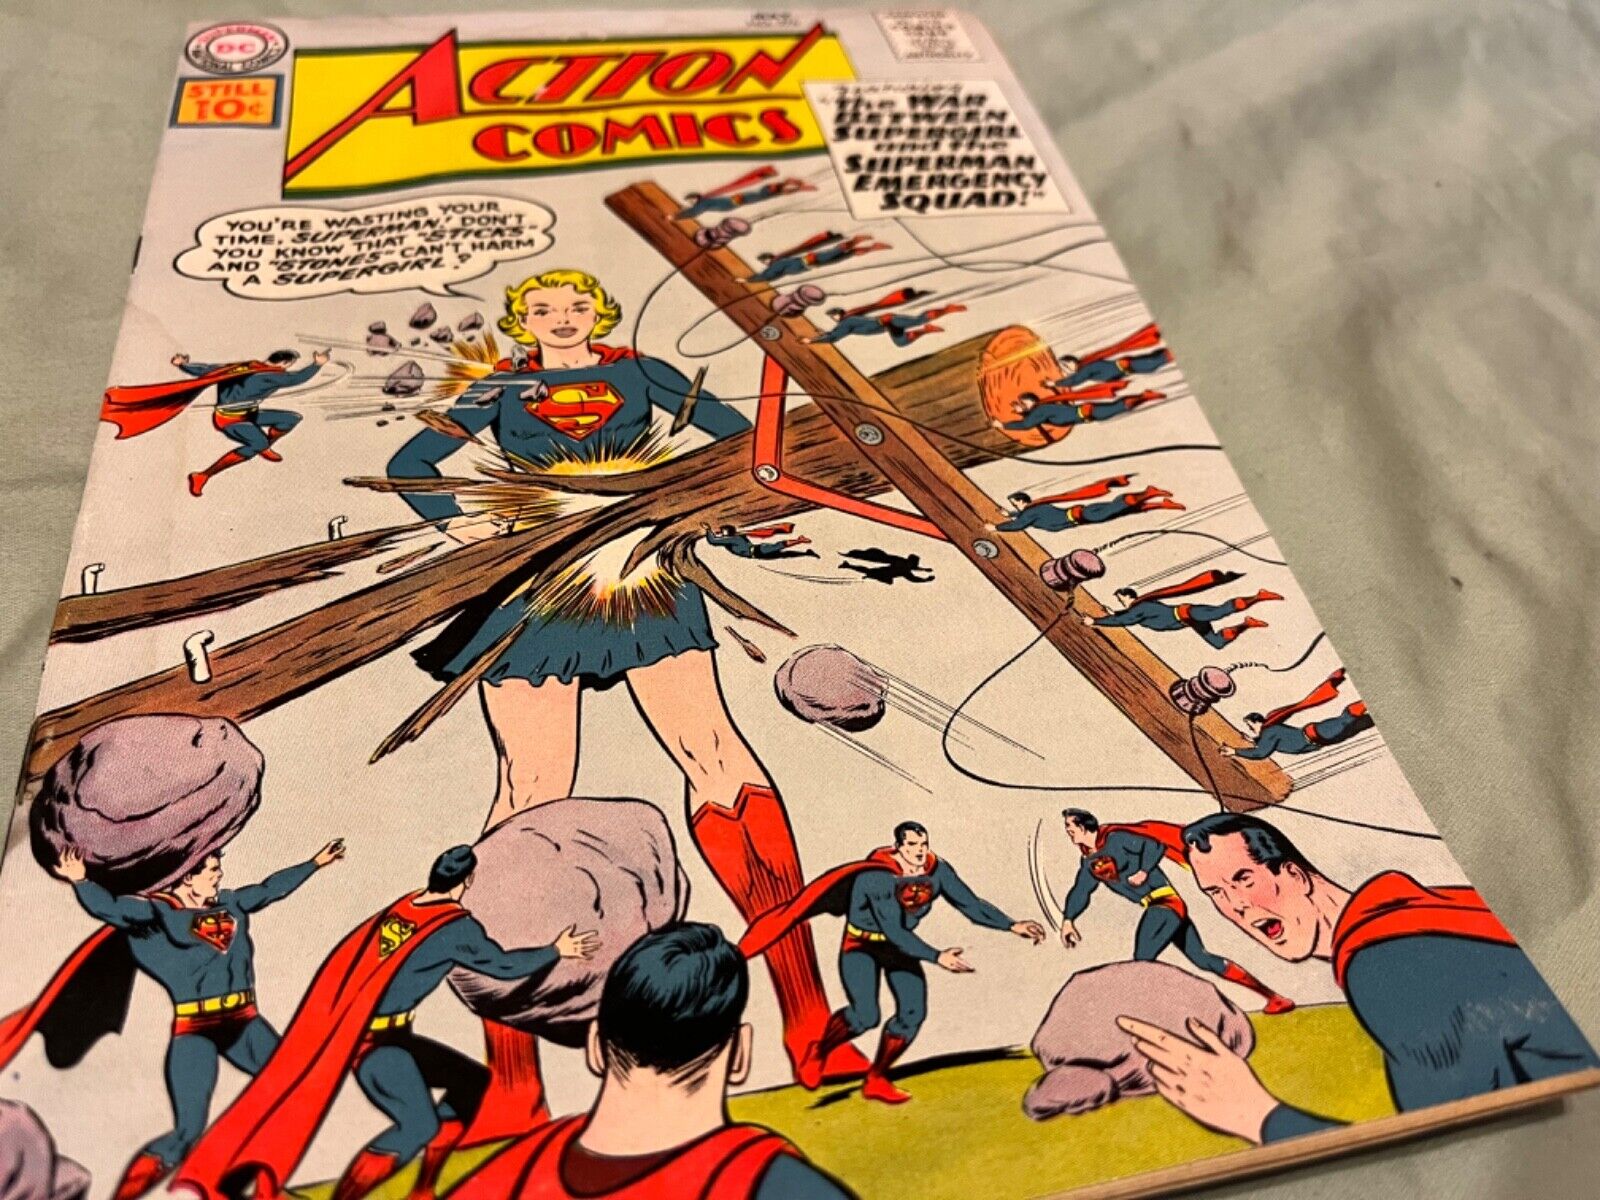 Action Comics #276 The War Between Supergirl And The Superman Emergency Squad